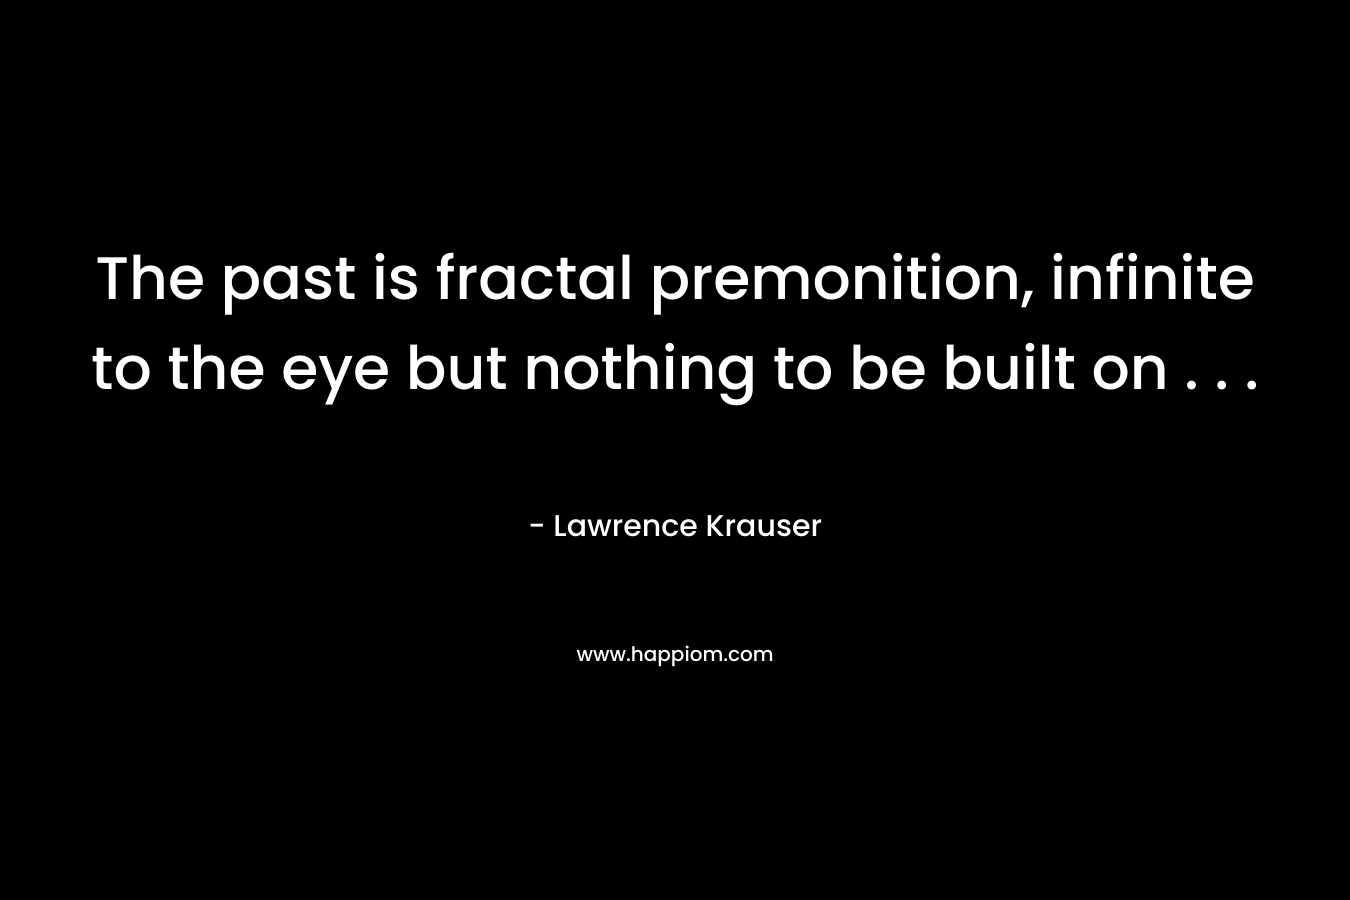 The past is fractal premonition, infinite to the eye but nothing to be built on . . .